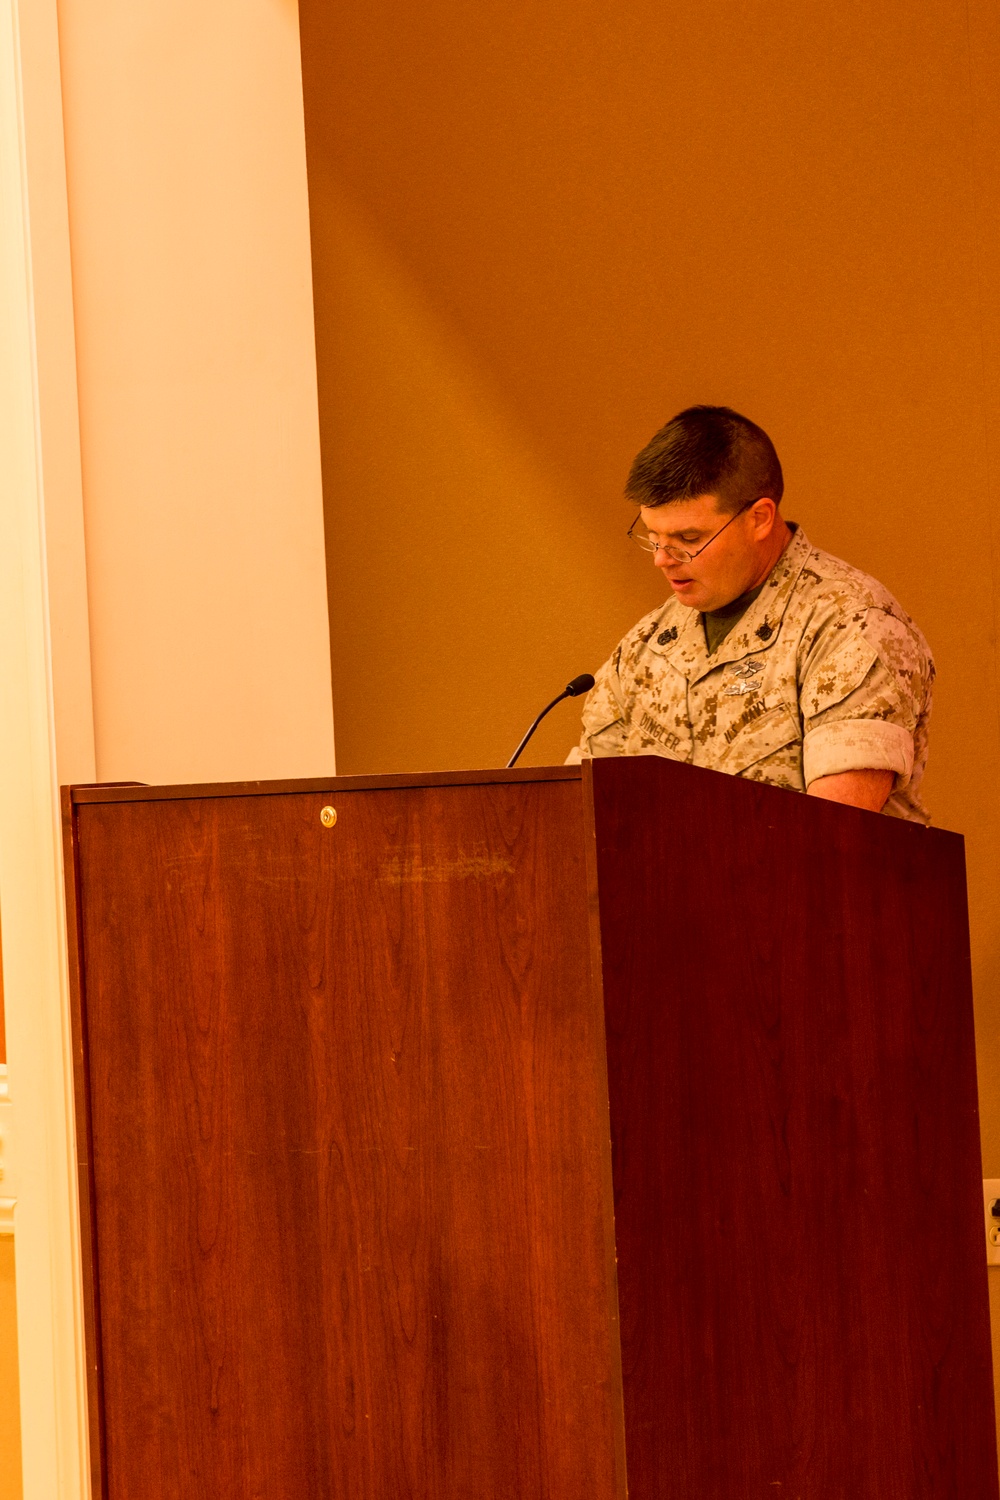 Lifesaving actions: corpsman recognized for battlefield service